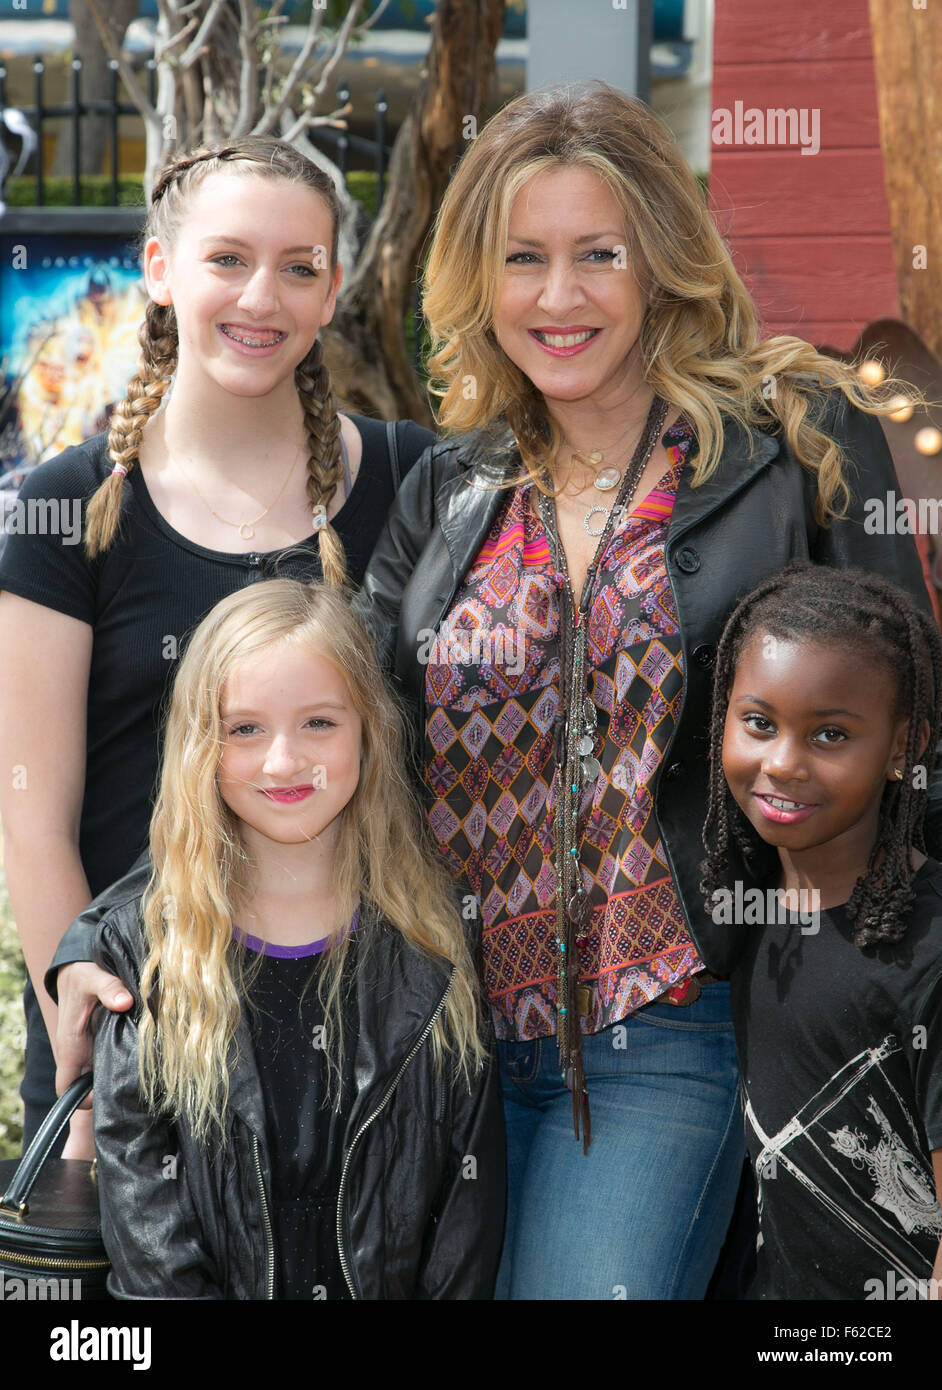 Celebrities attend the Goosebumps Red Carpet Premiere at Westwood Village Theatre.  Featuring: Joely Fisher, family Where: Los Angeles, California, United States When: 04 Oct 2015 Stock Photo